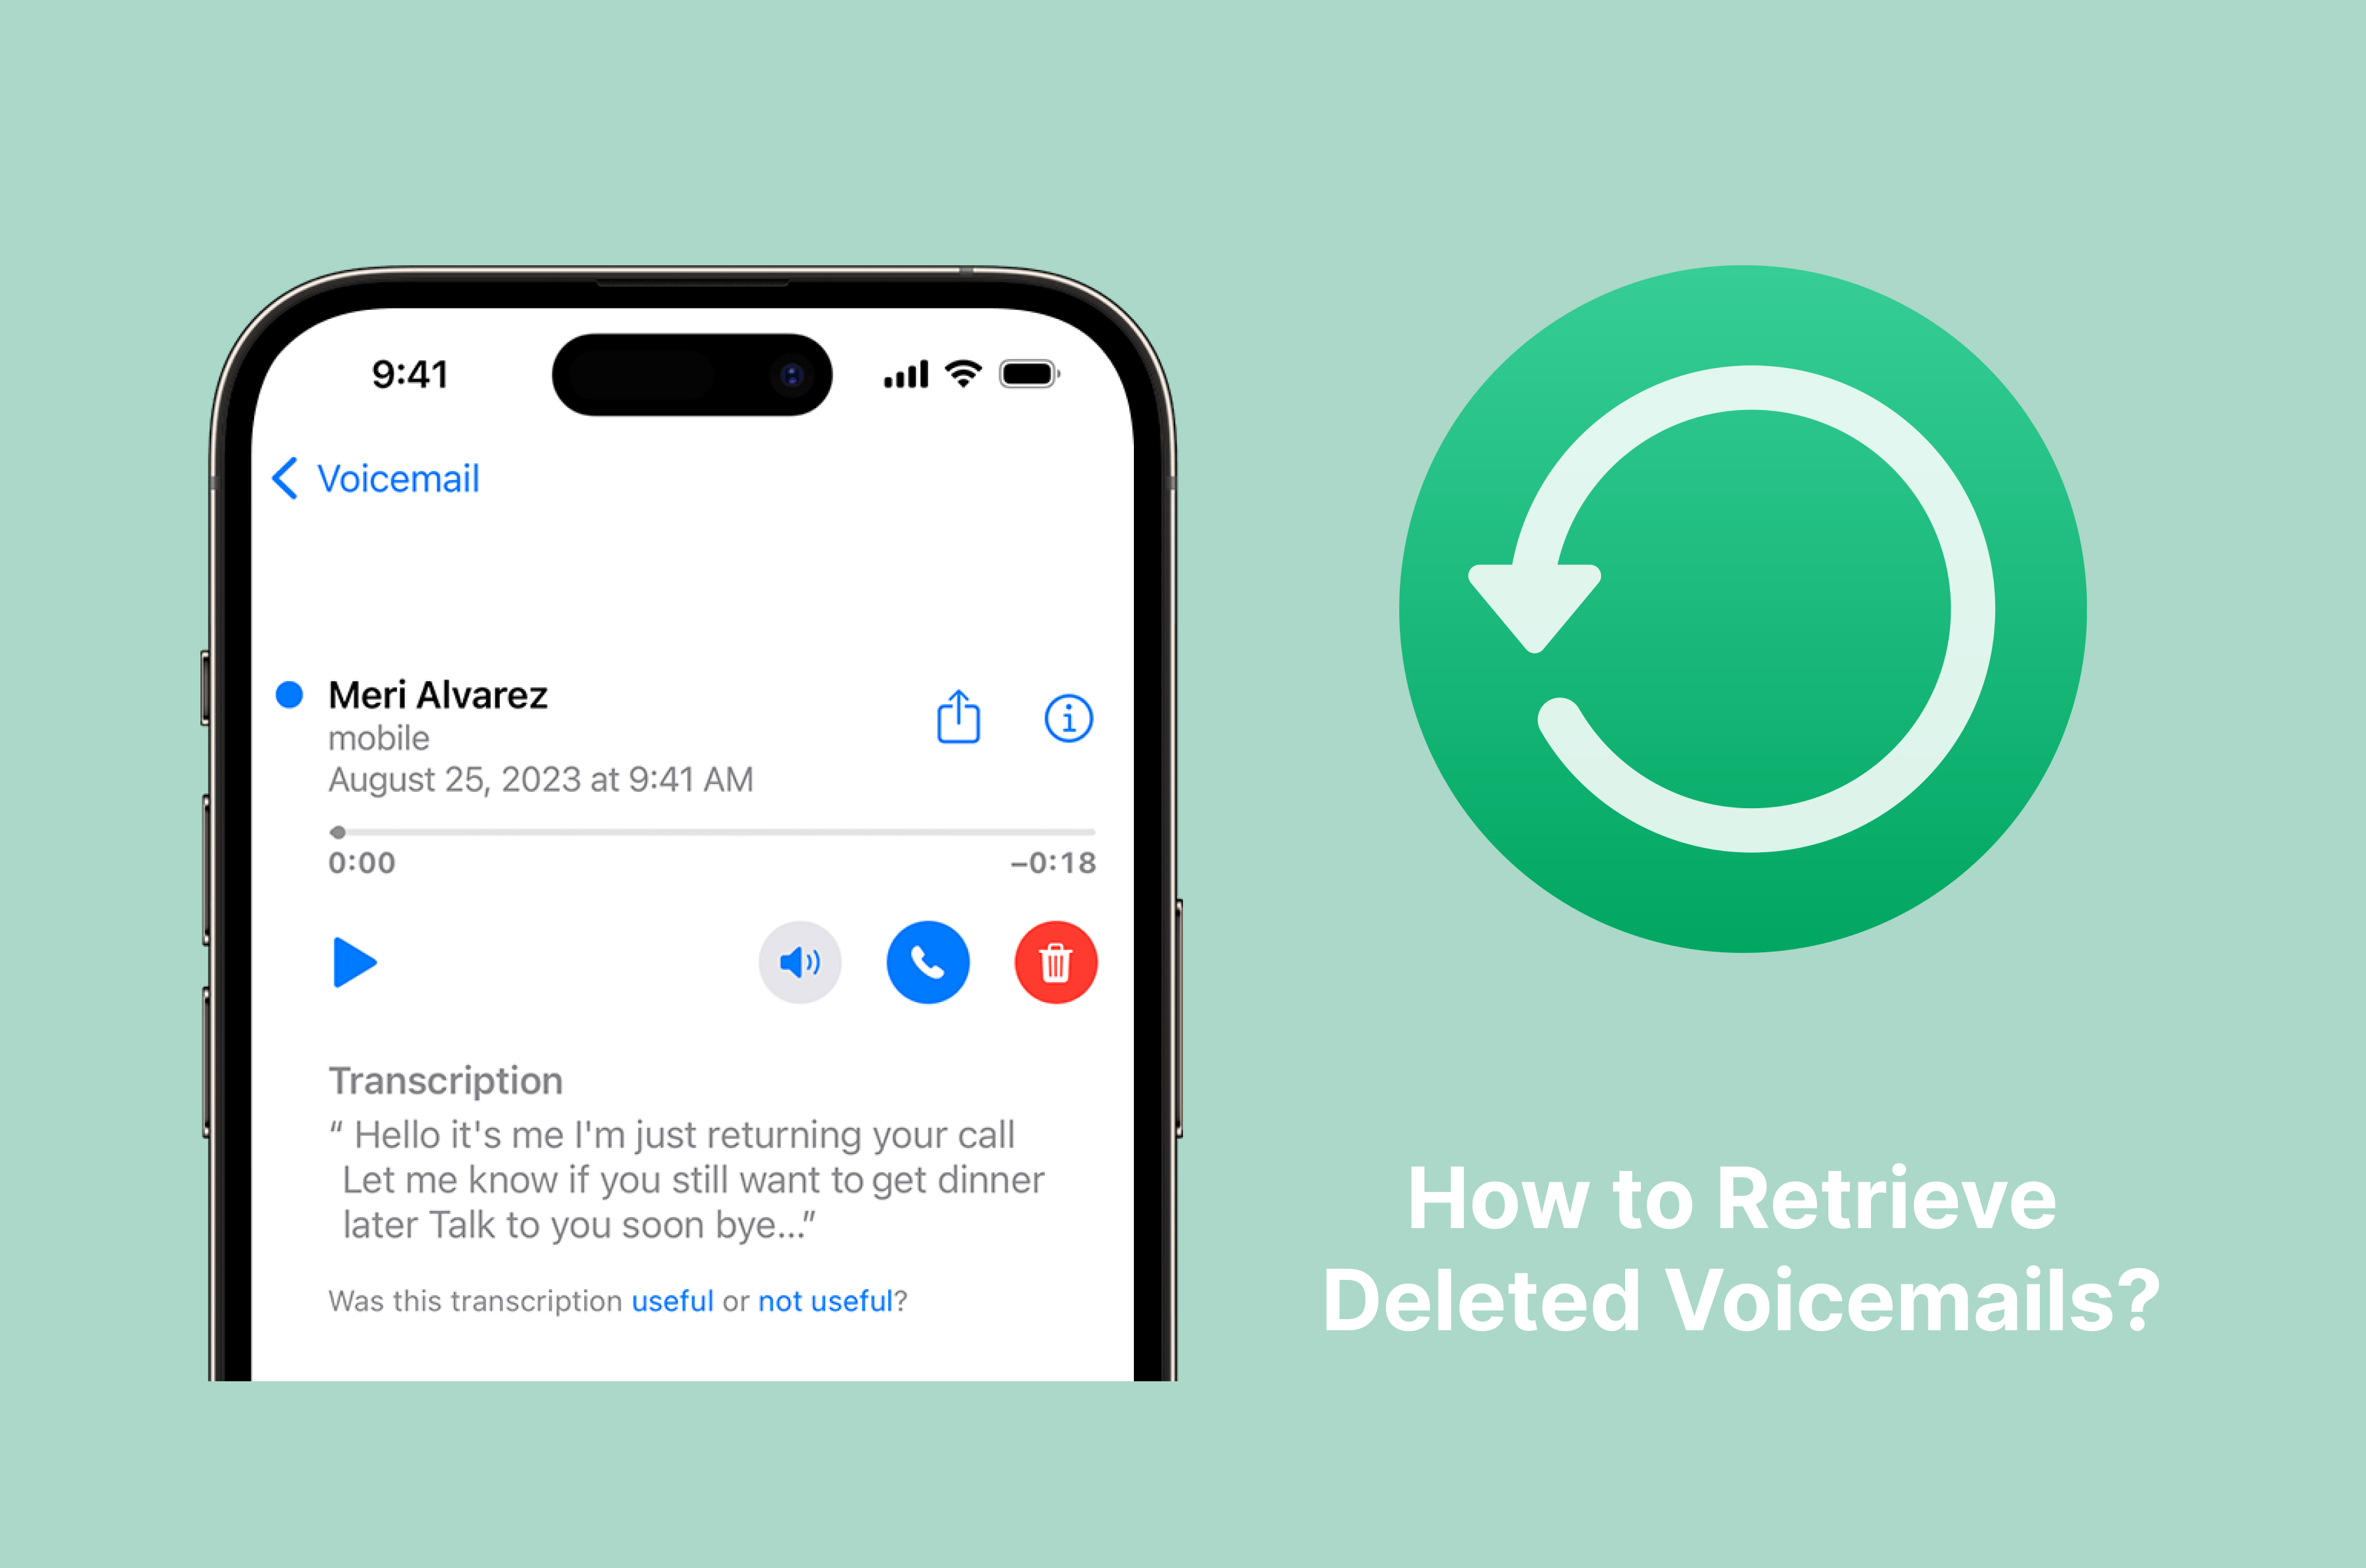 How Can I Retrieve Deleted Voicemails?